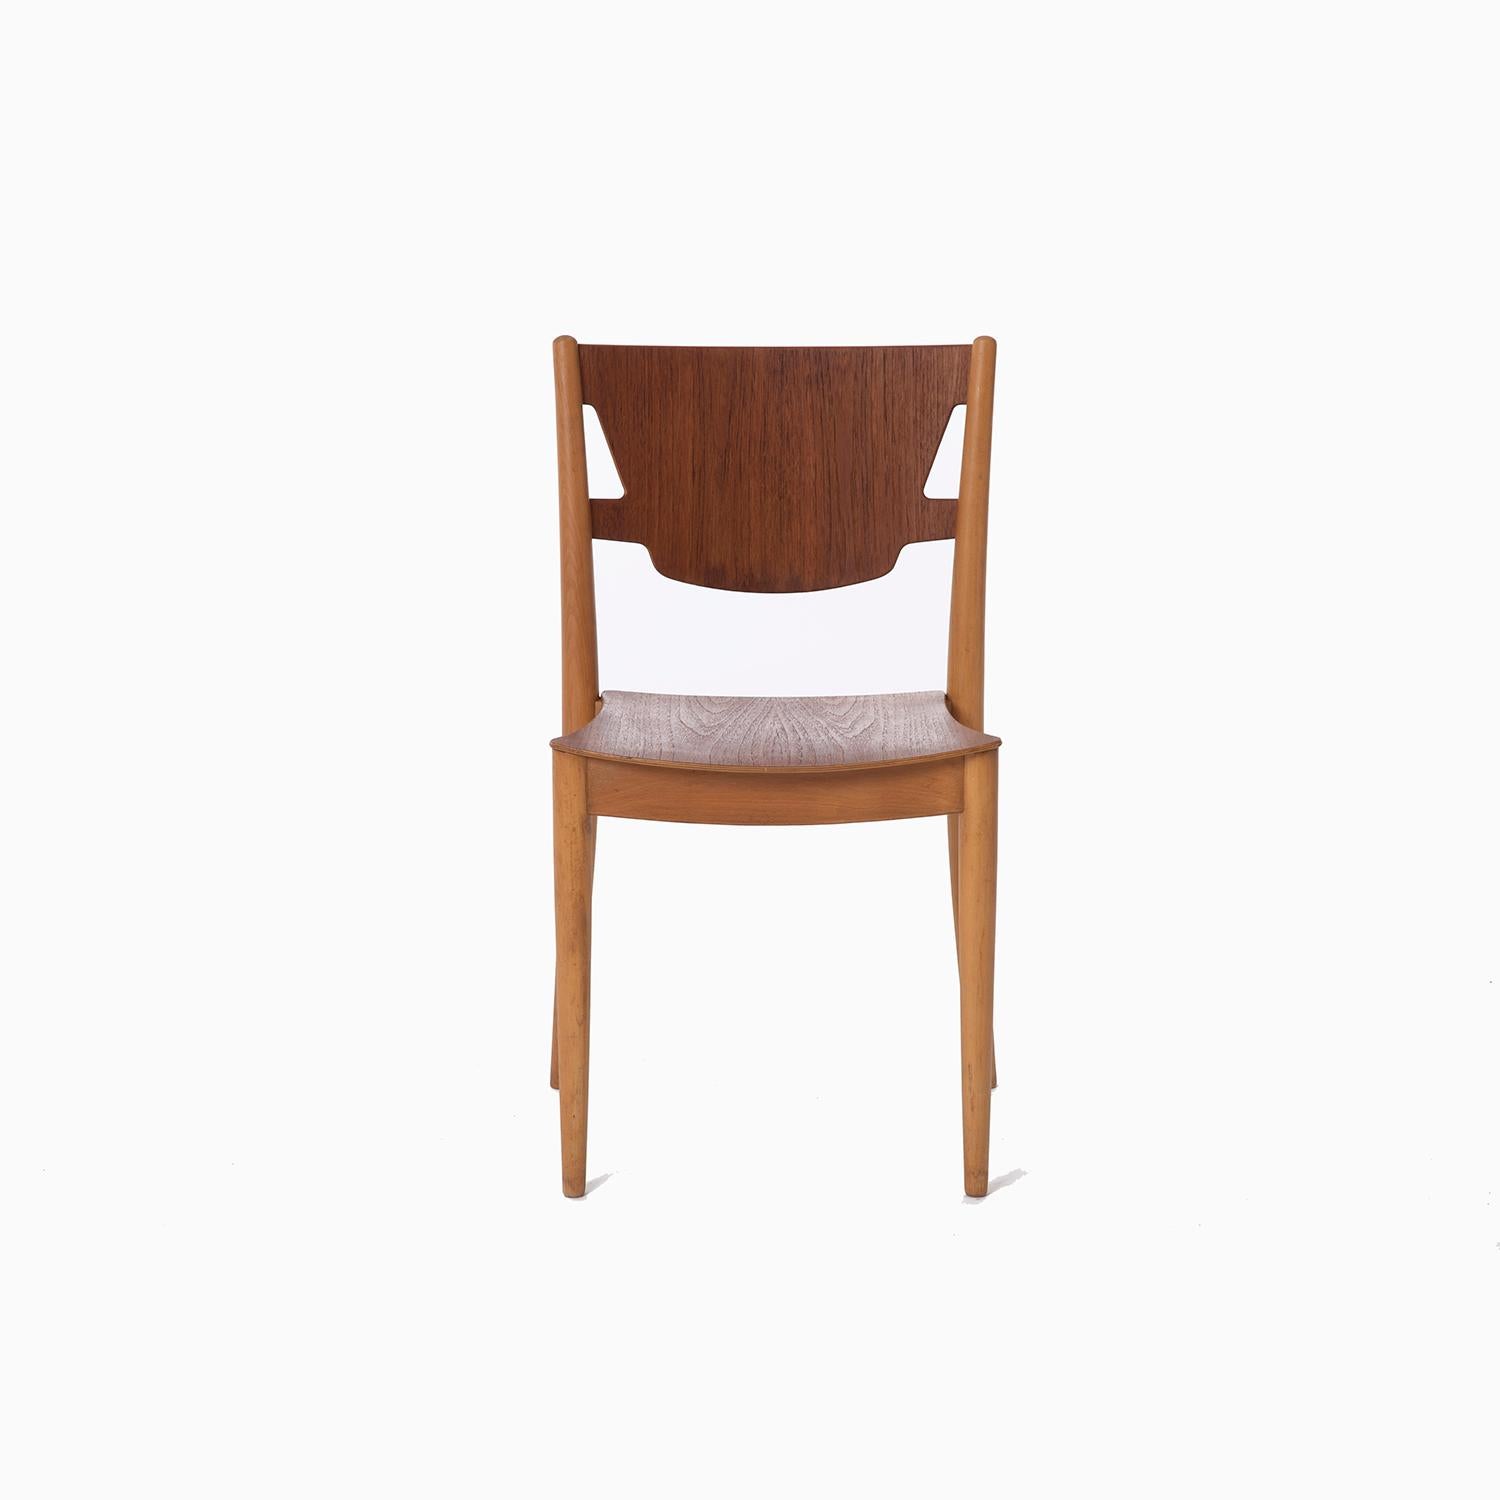 Peter Hvidt & Orla Molgaard-Nielsen designed  teak & beech side chair produced by  C. Madsens. Cleaning and oiling of wood will be completed upon purchase. 

Professional, skilled furniture restoration is an integral part of what we do every day.